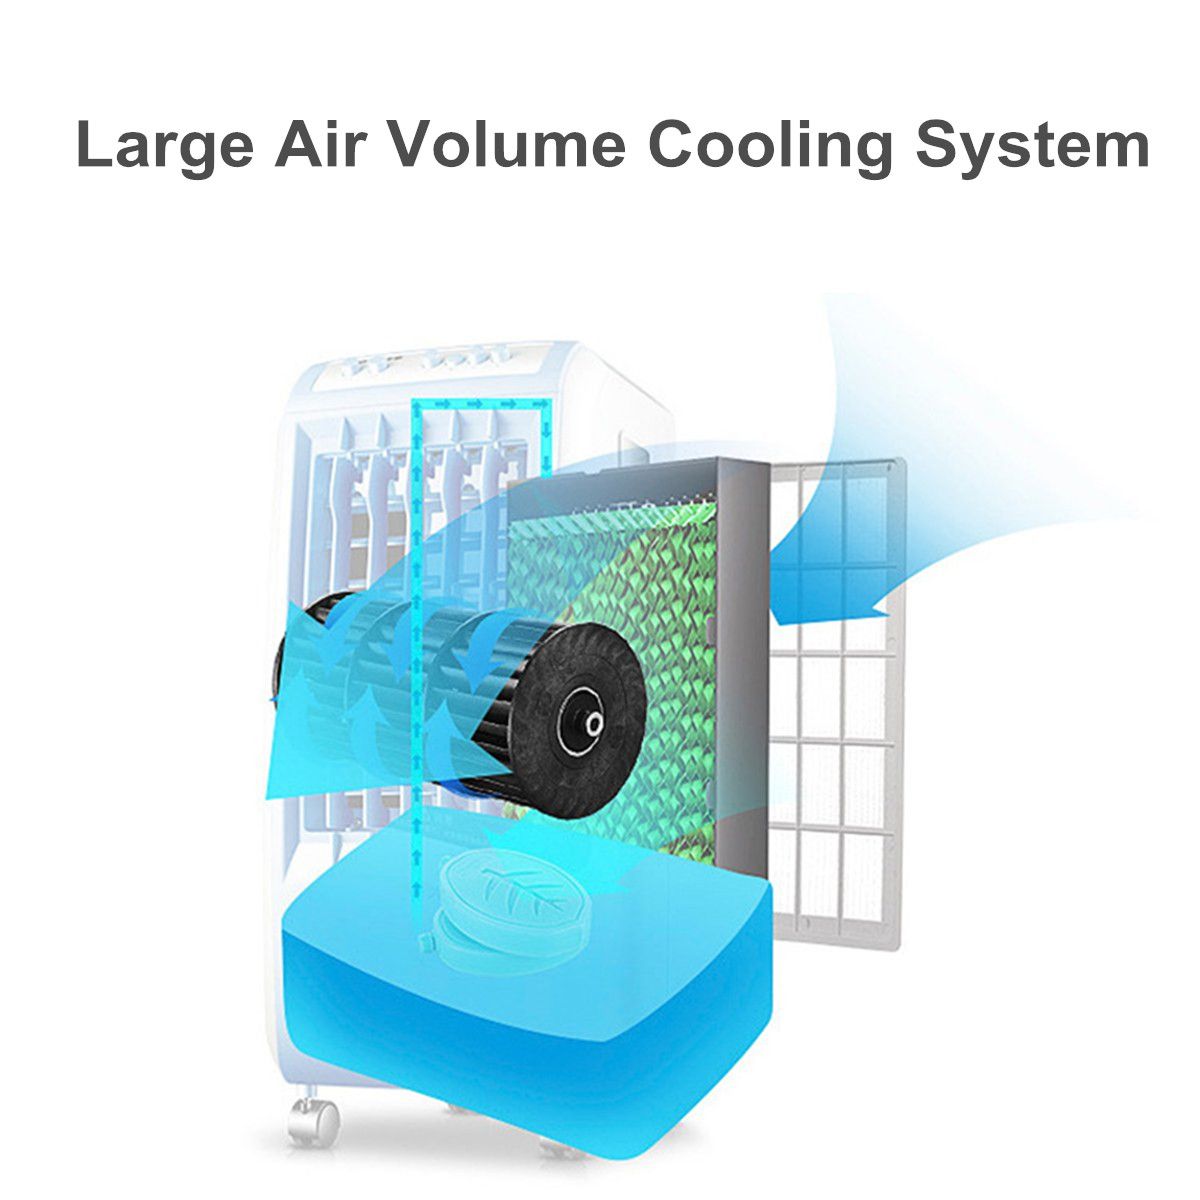 220V-Portable-Air-Conditioner-Fan-Humidifier-Cooler-Water-Cooling-System-MechanicalRemote-Control-1681563